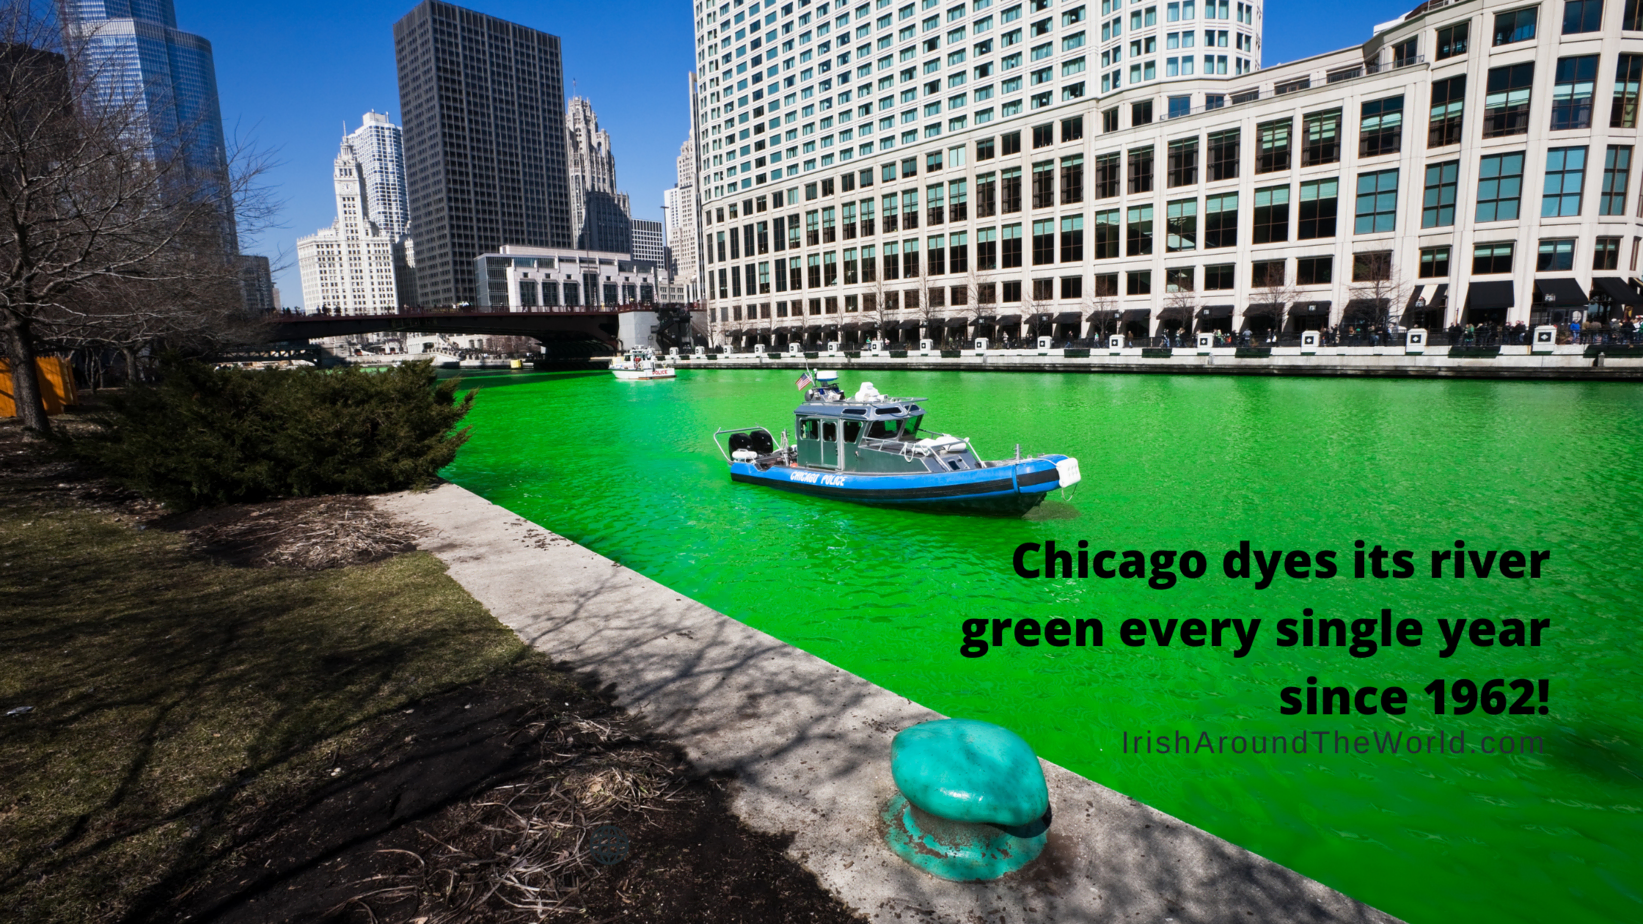 A boat with dye in the Chicago river